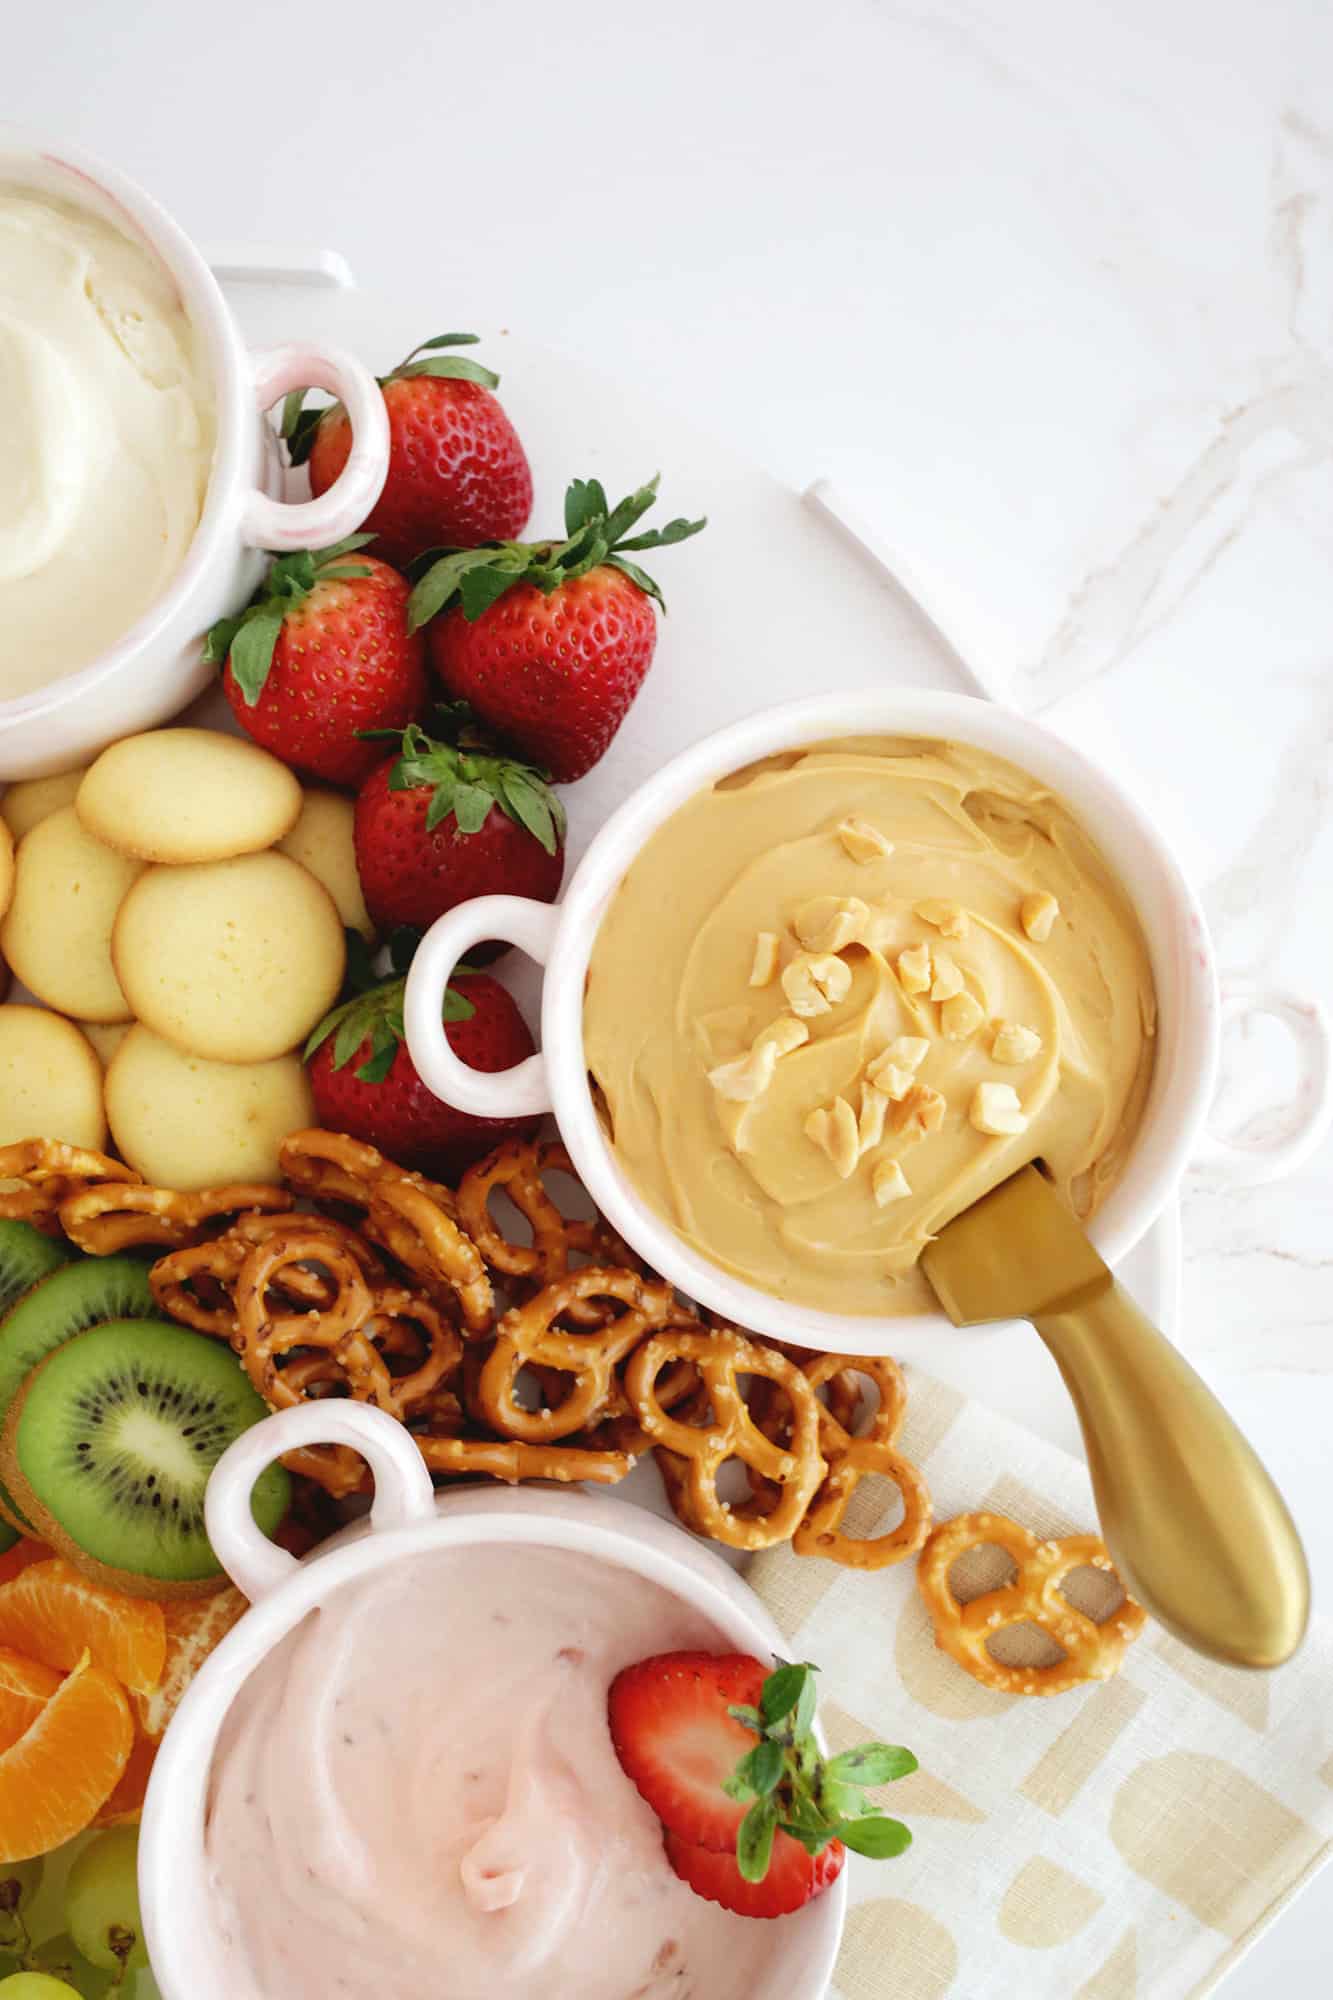 Cream cheese and fruit dip